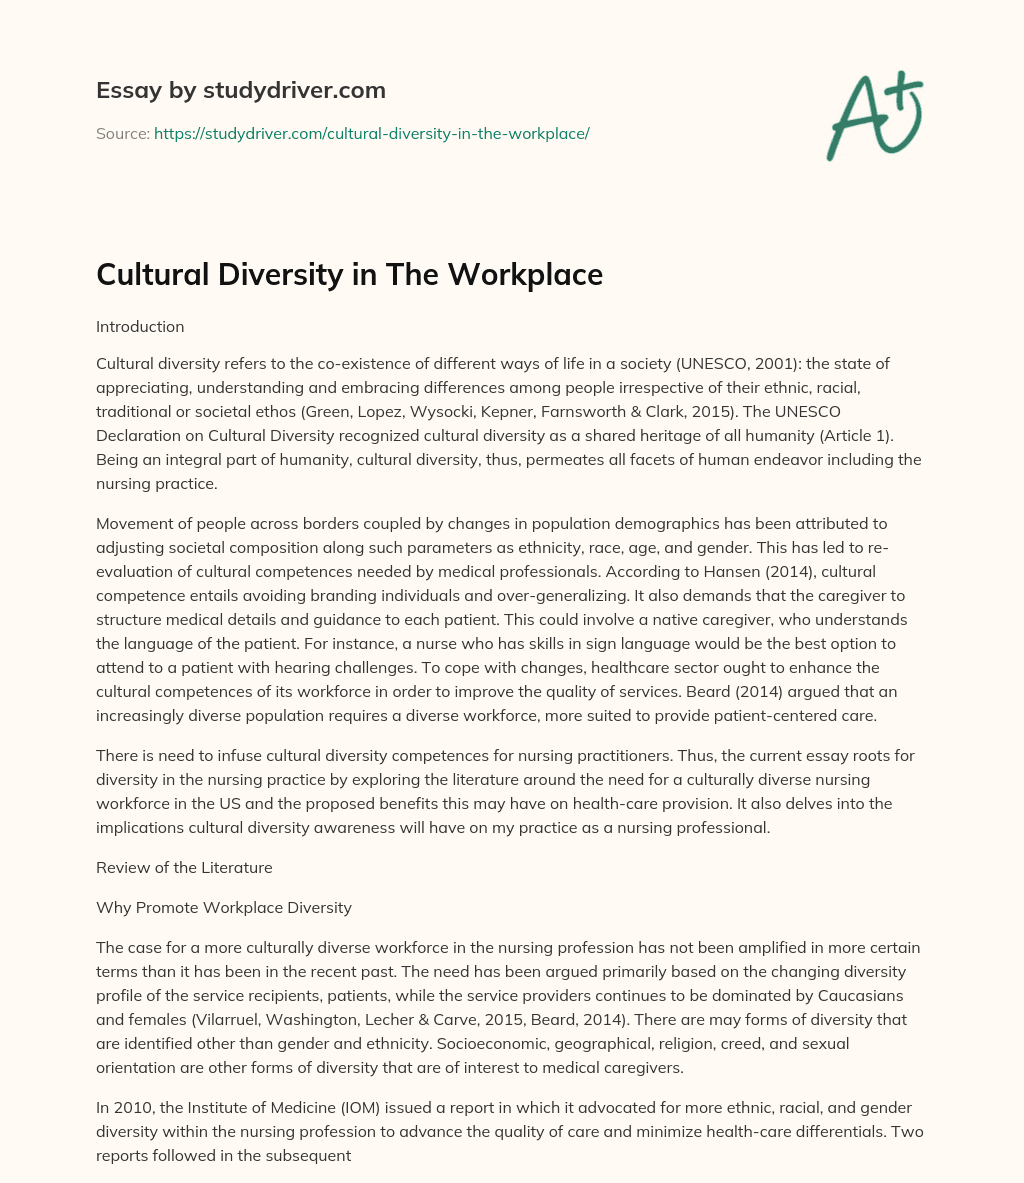 Cultural Diversity in the Workplace essay